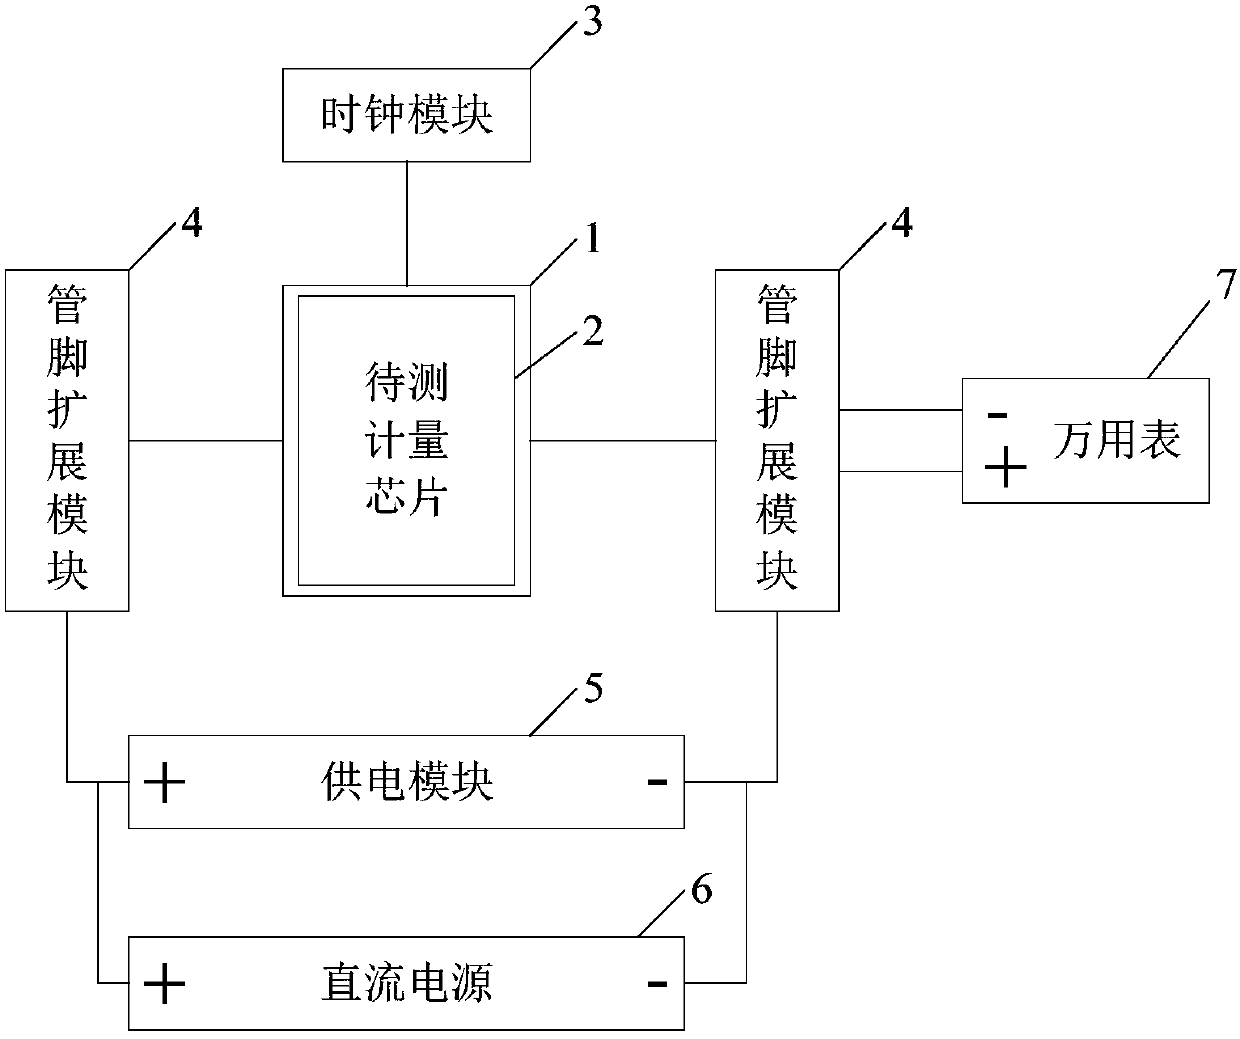 Metering chip reference voltage measurement device and method